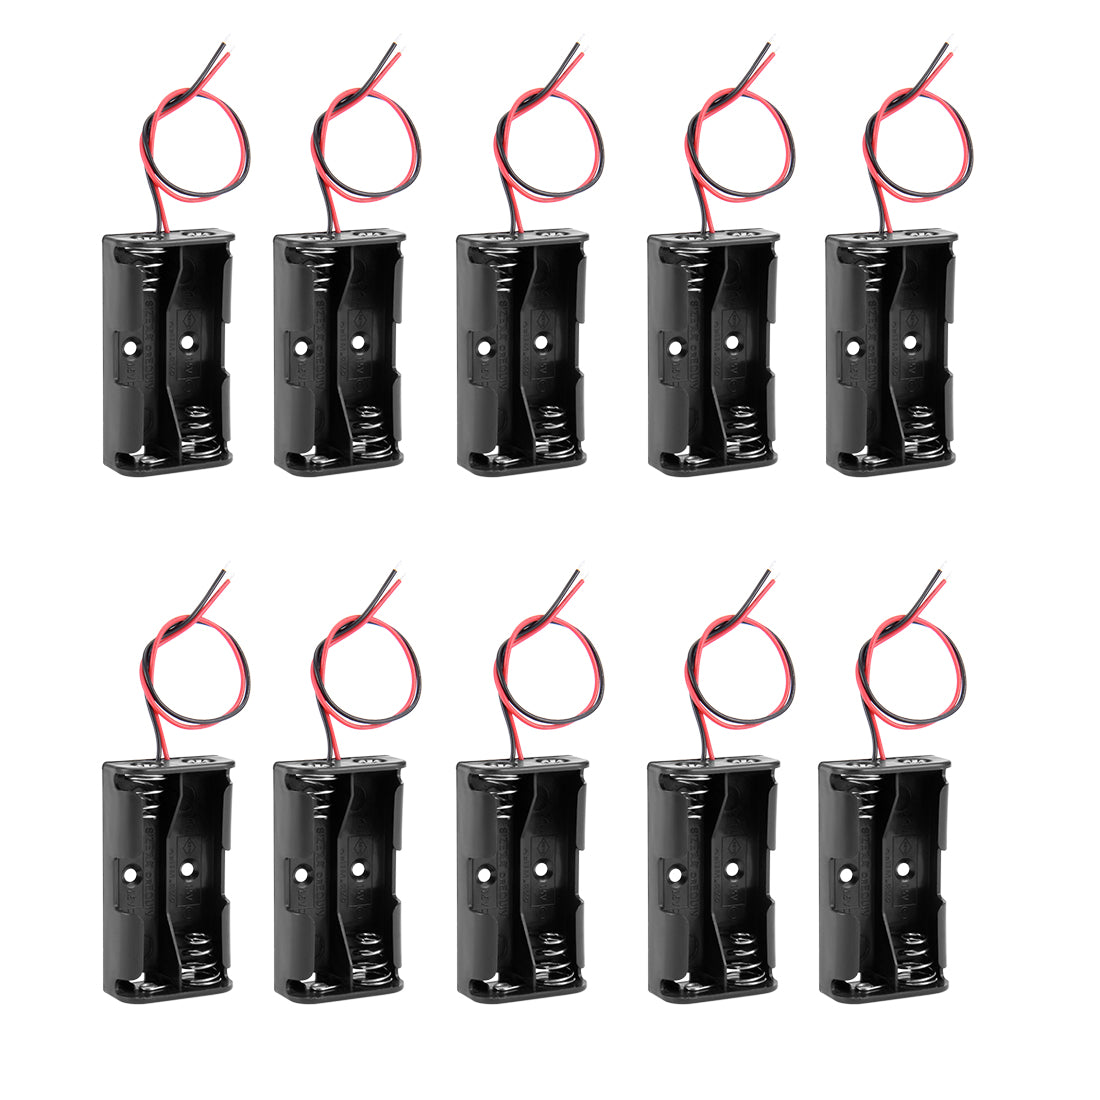 uxcell Uxcell 10 Pcs 3V Battery Holder Case Storage Box 2 x 1.5V AA Battery Wire Leads